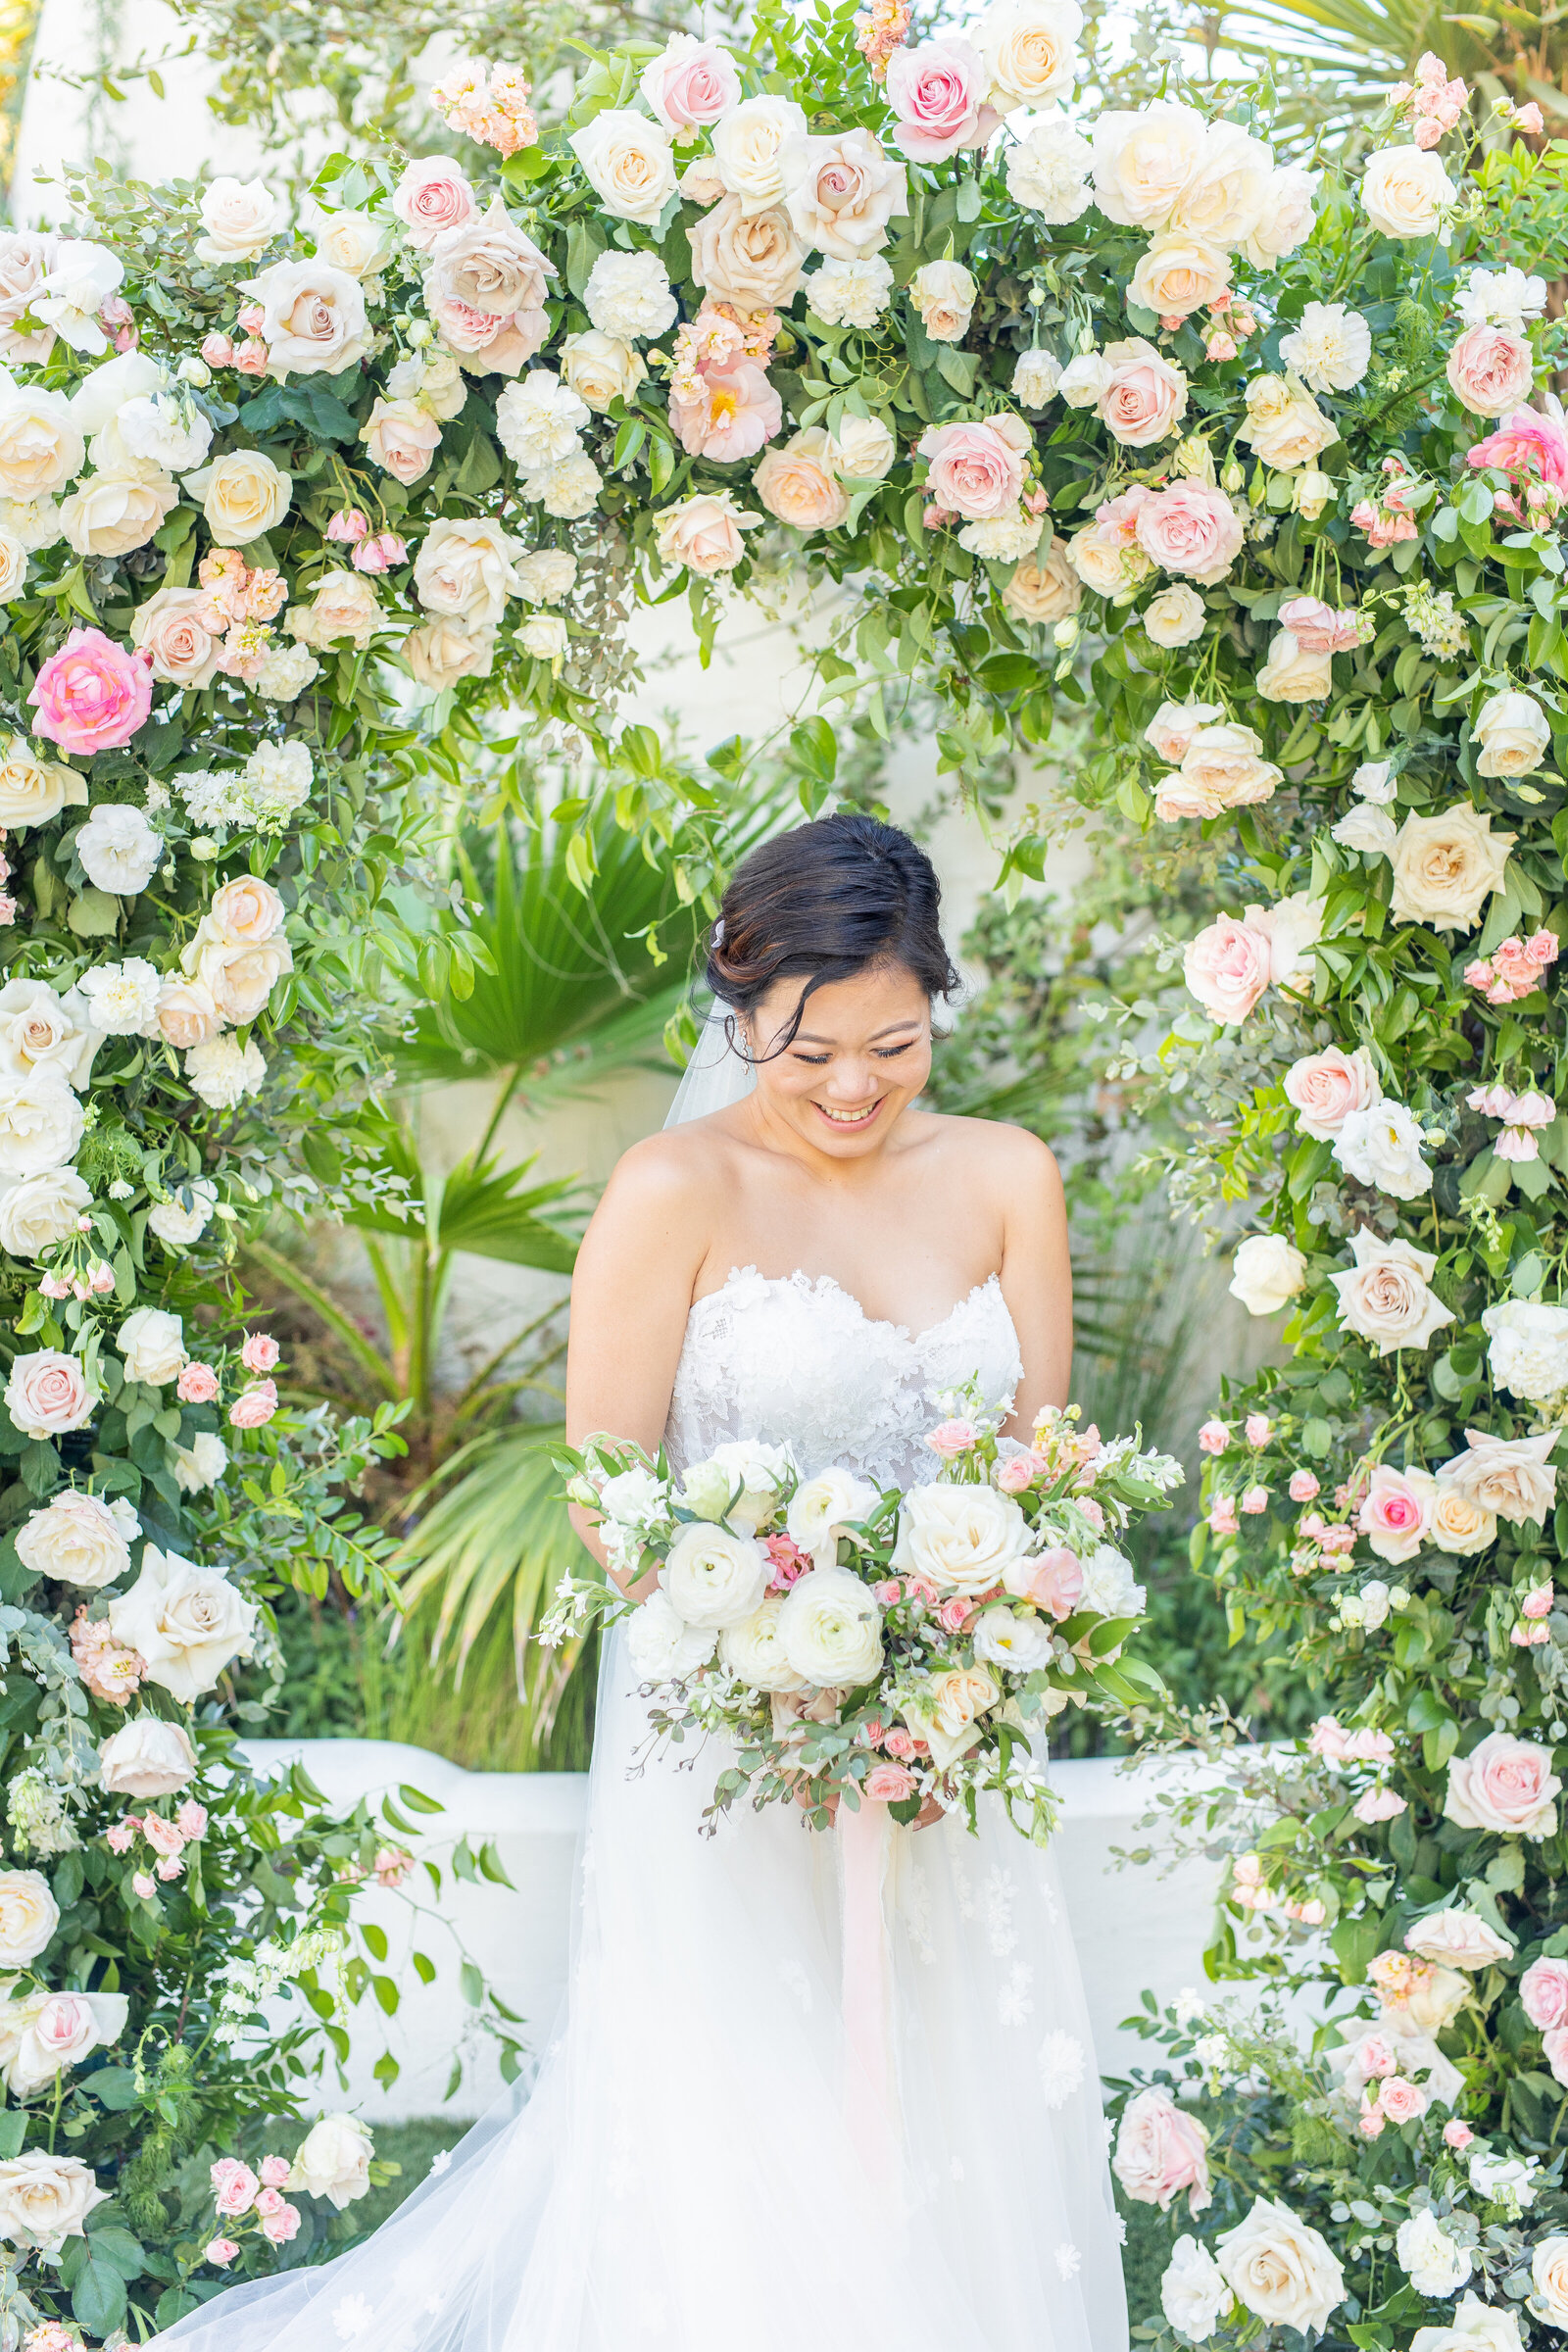 Bride holding bouquet under floral arch from ceremony at Tivoli wedding venue in southern California.